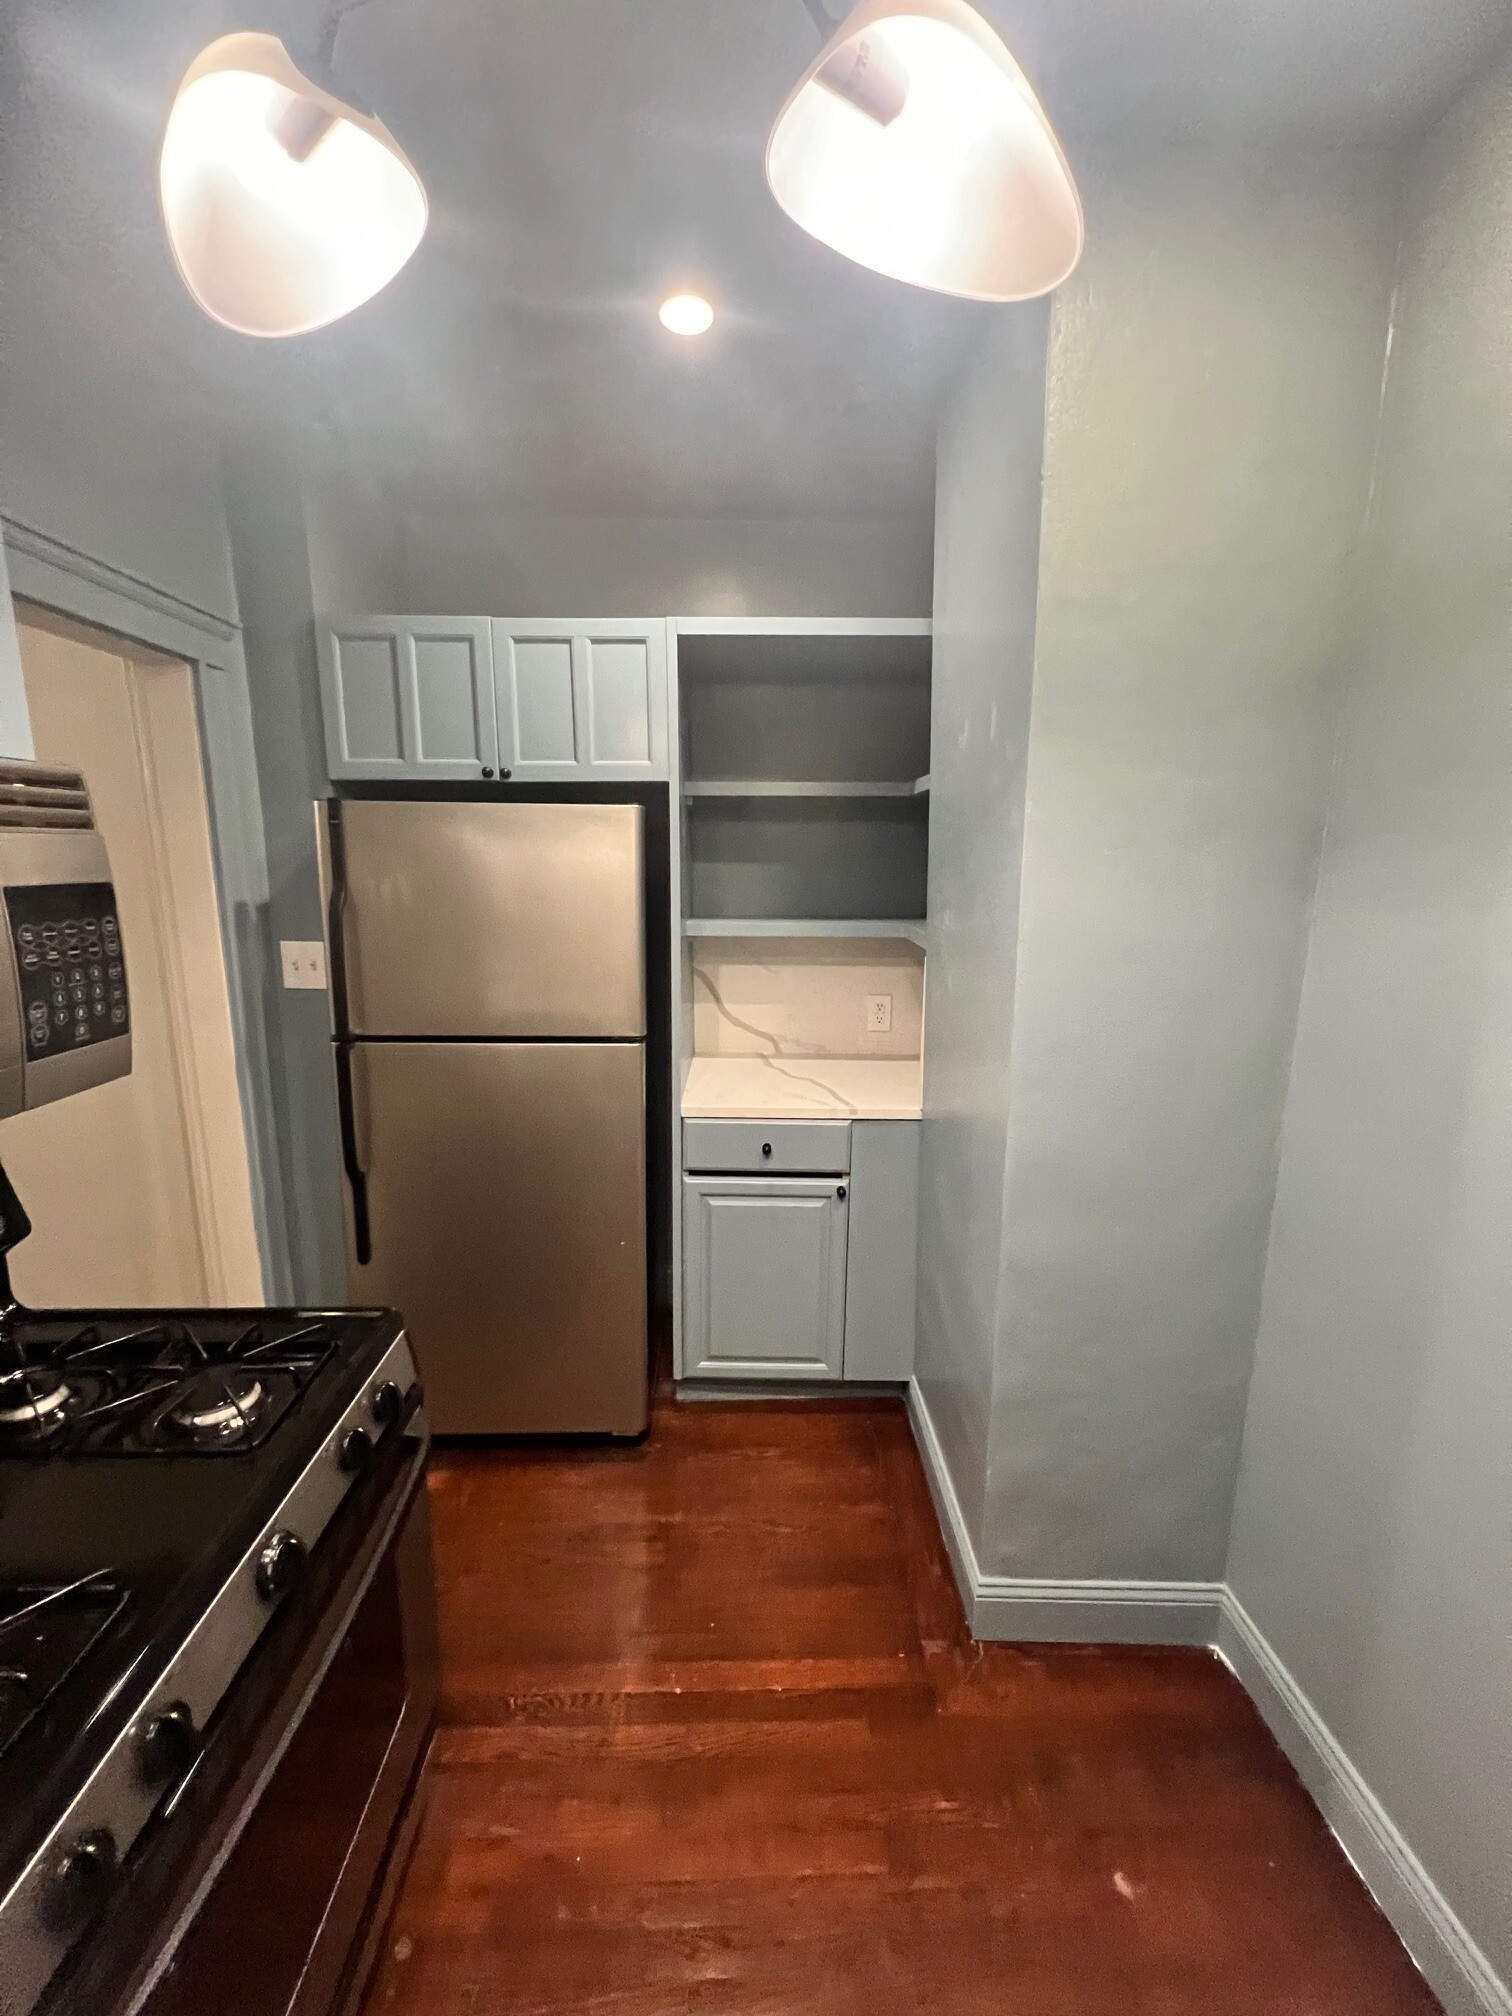 Photos of apartment on Chester St.,Boston MA 02134